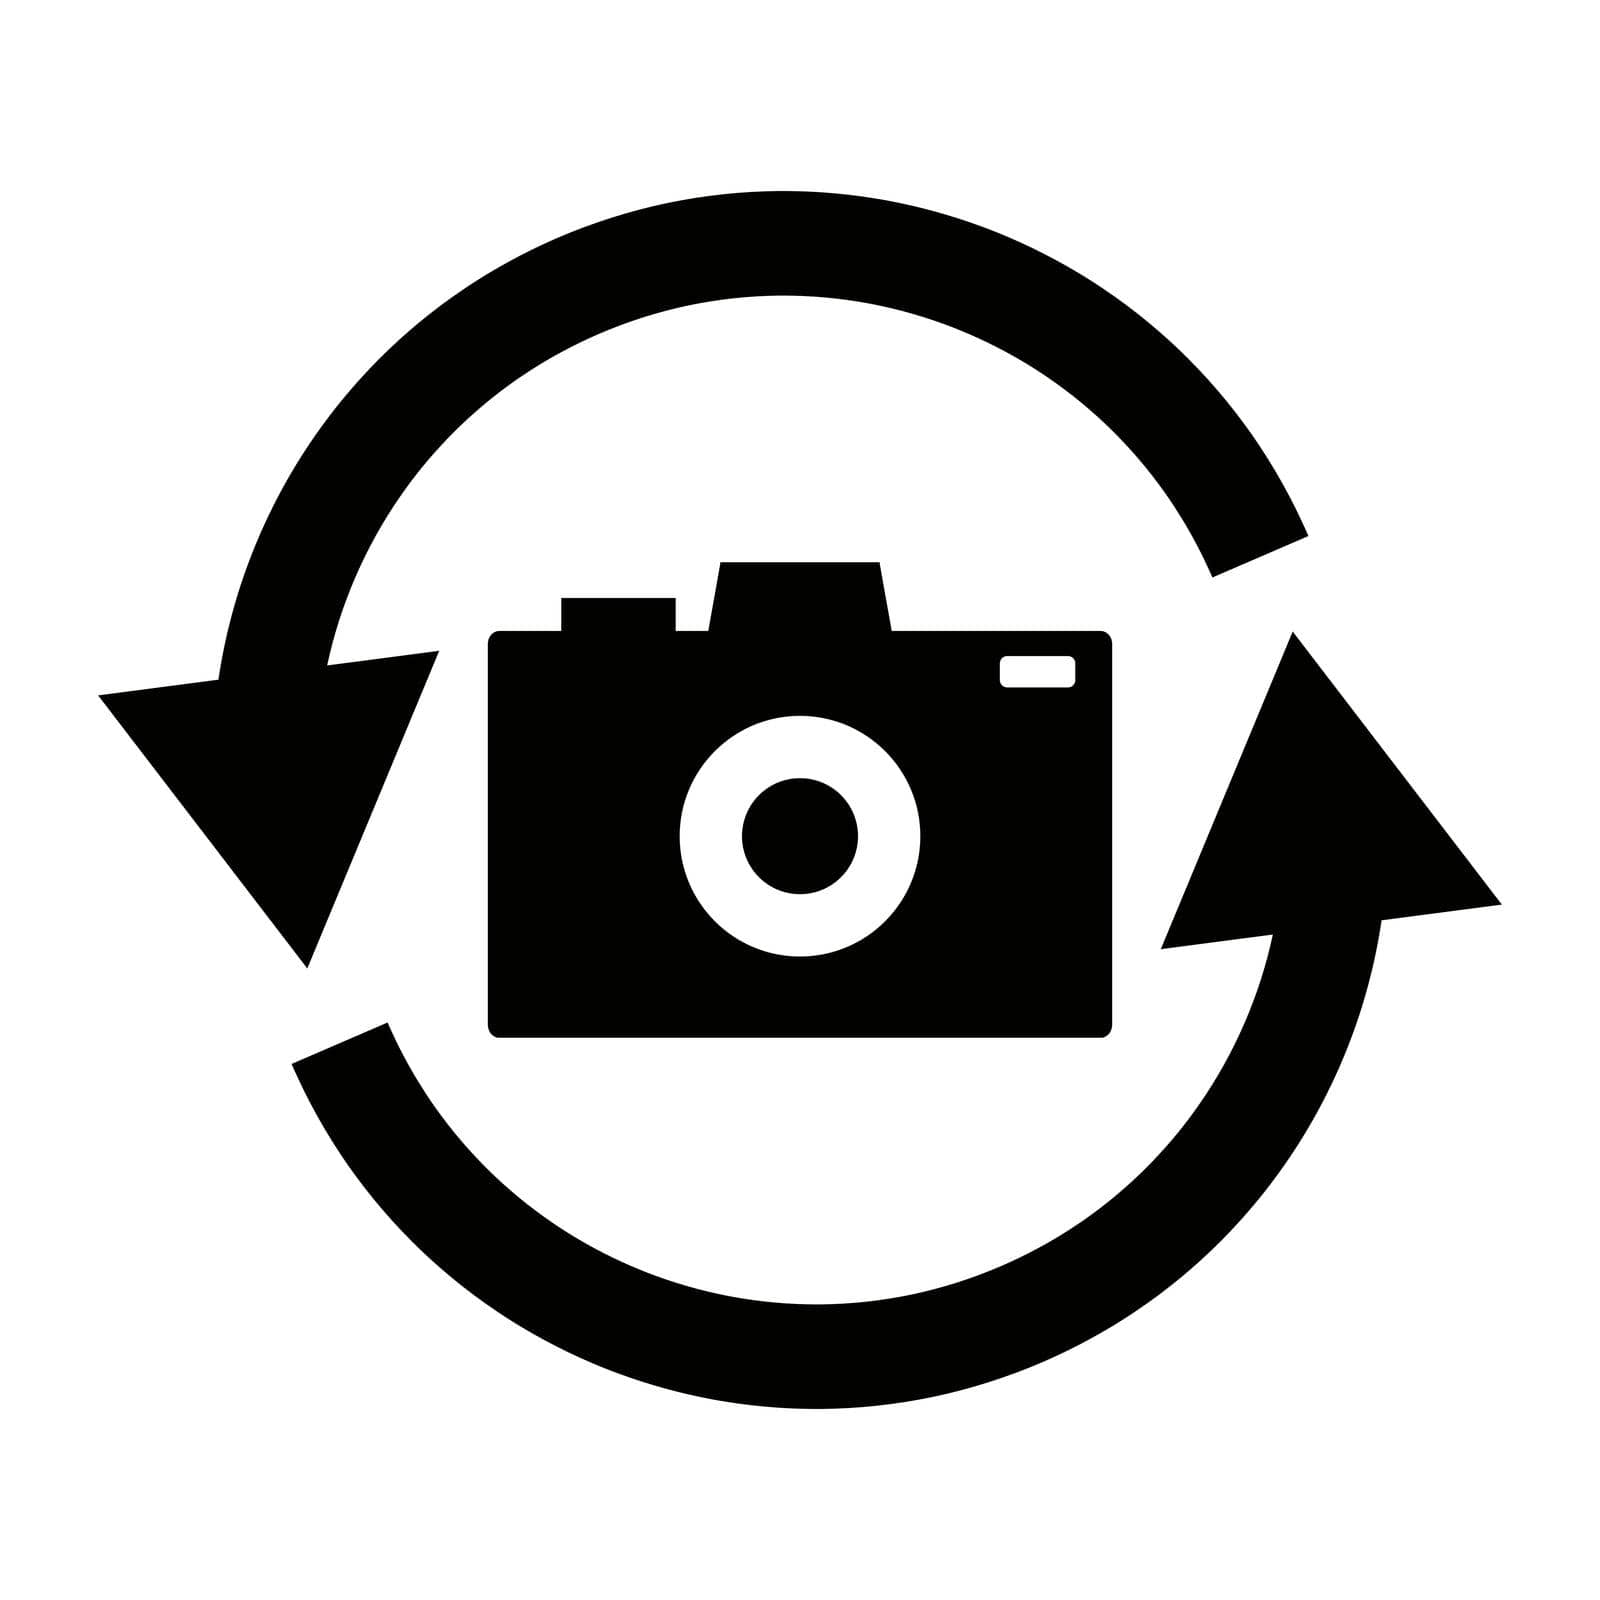 Rotating arrow and camera icon. Vectors. by illust_monster